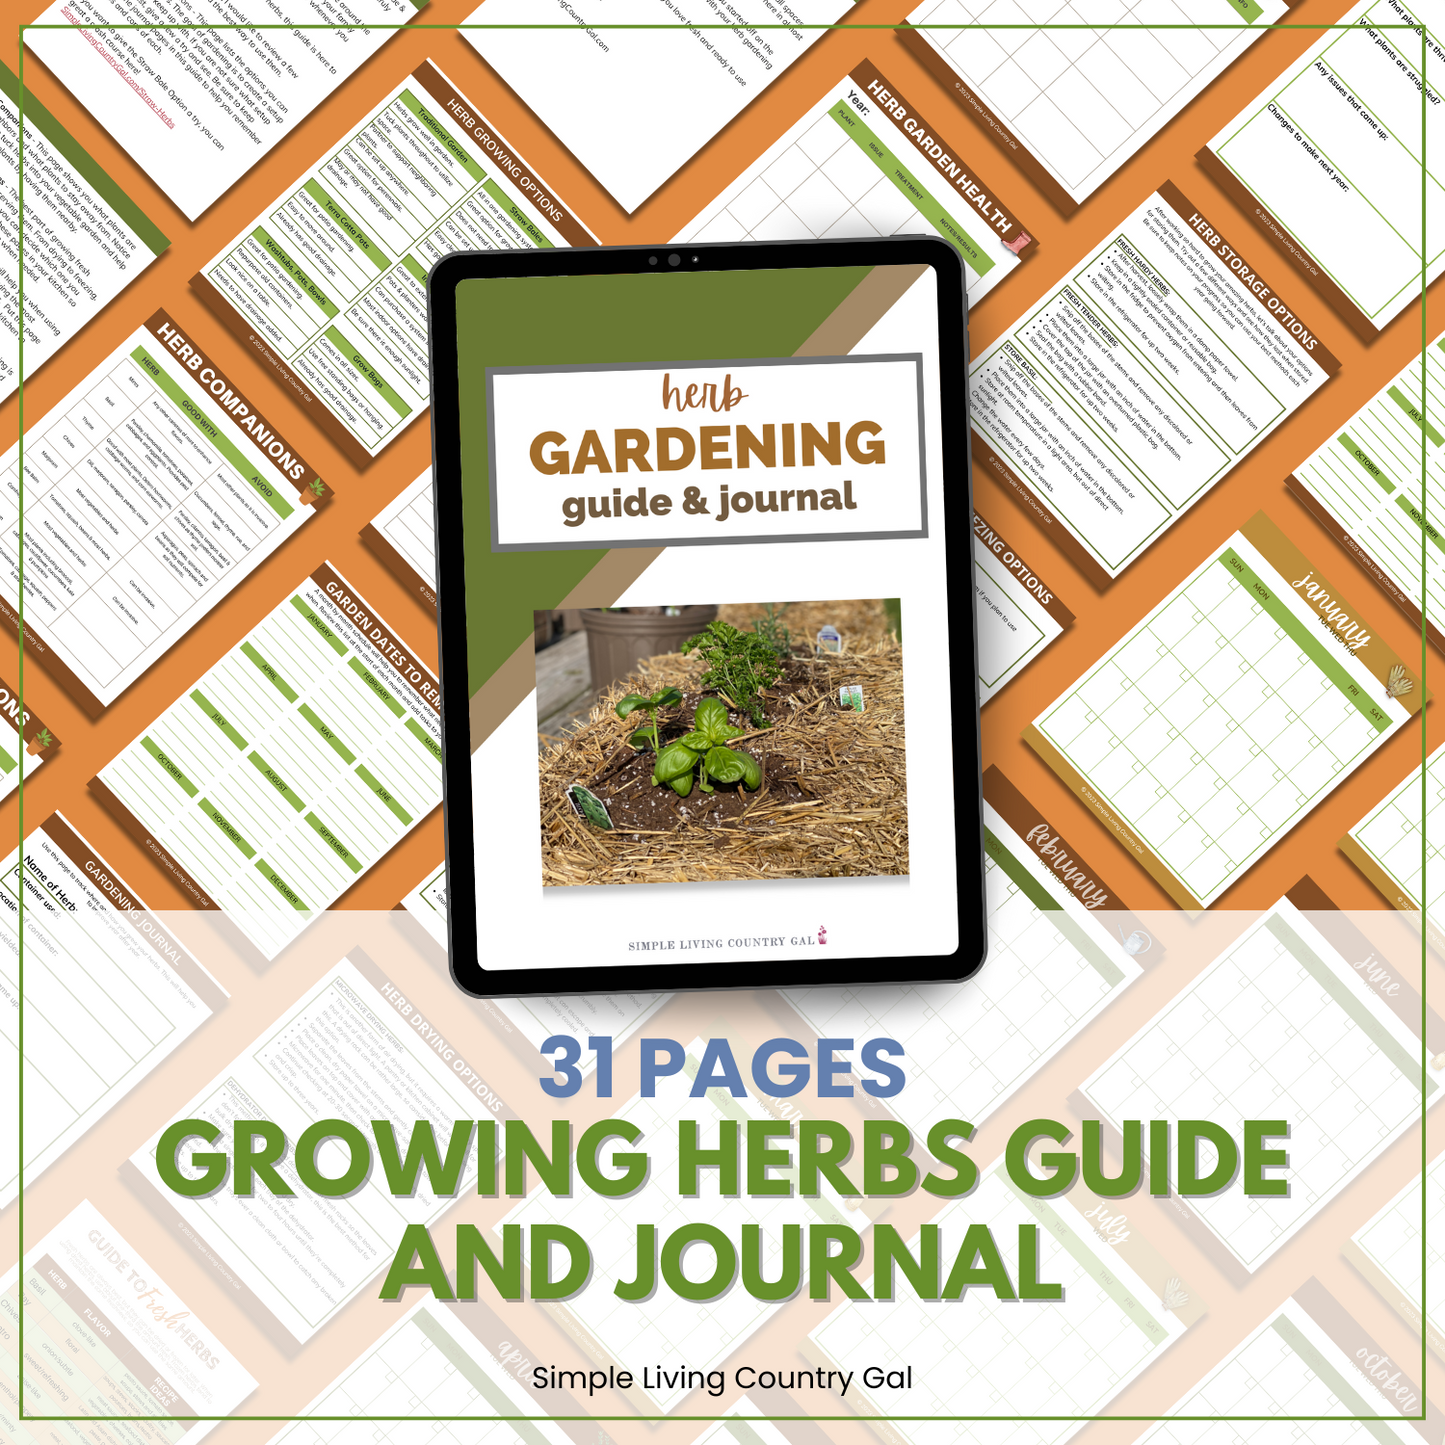 Growing Herbs - Guide and Journal!